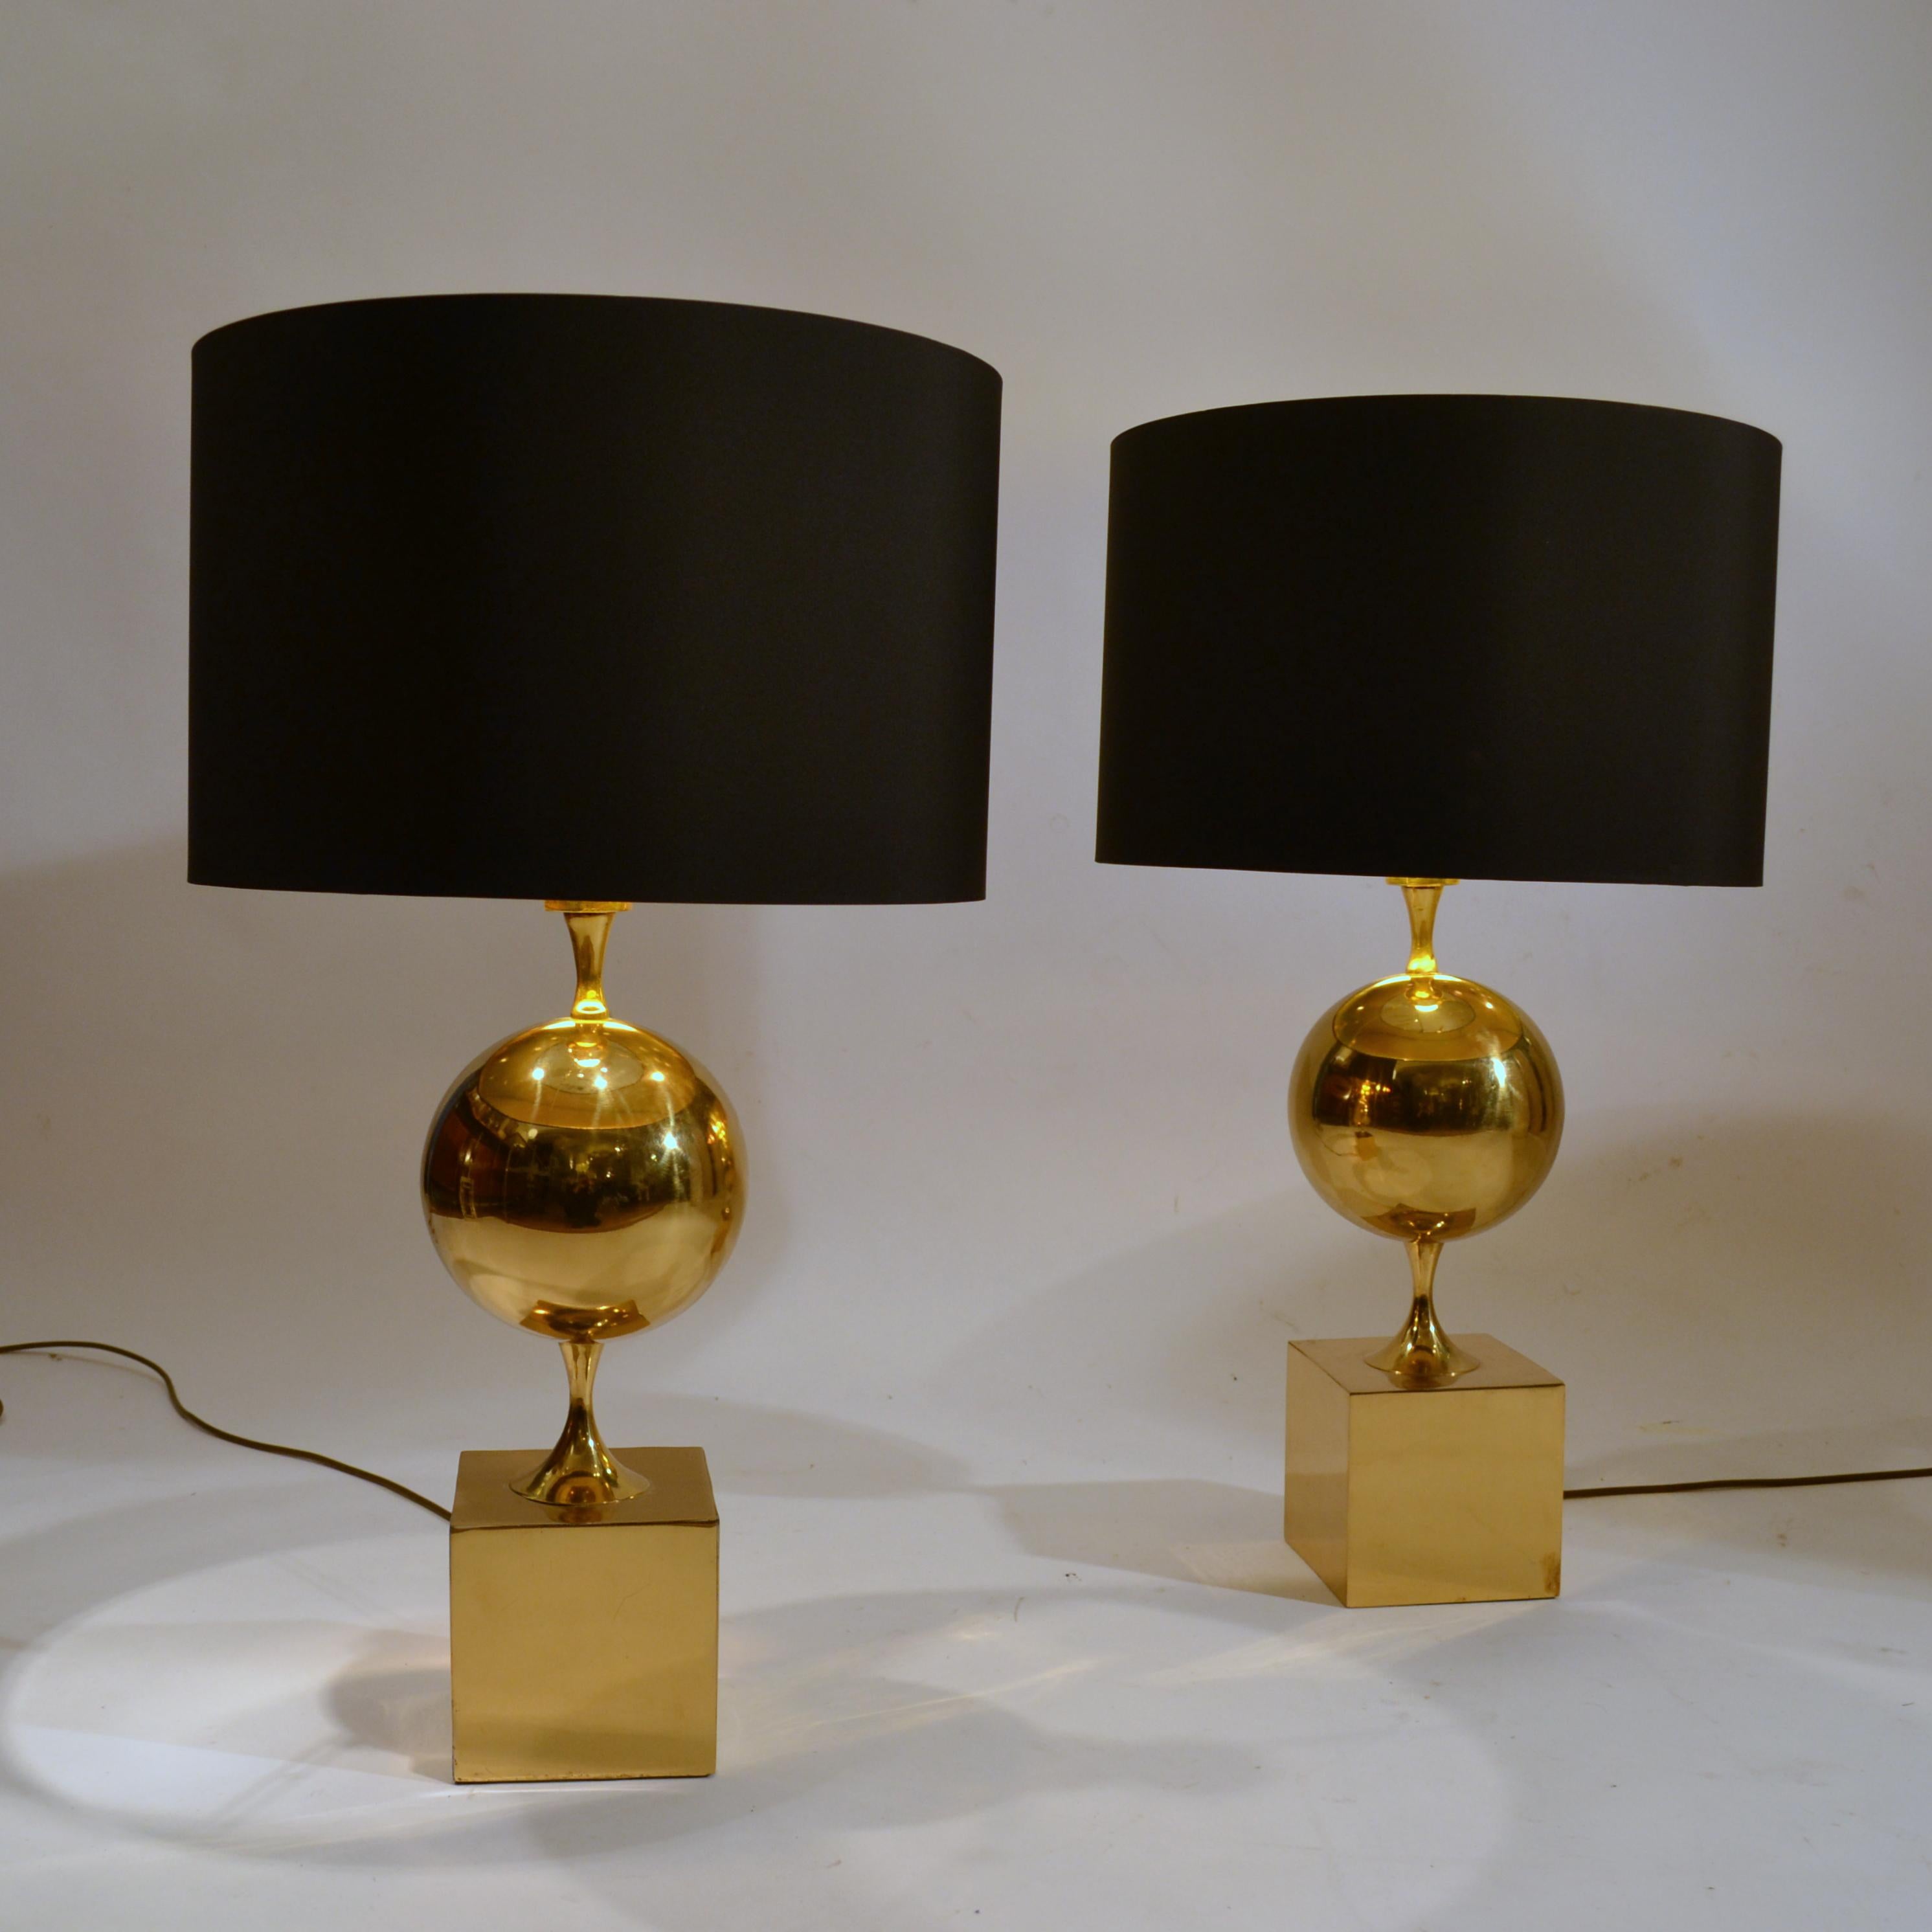 Elegant pair rare of 1970s polished brass table lamps by Maison Philippe Barbier, produced in a small workshop in the center of Paris. The simplest of geometric forms are made of a cube at the base followed by perfect sphere above. 
The black and